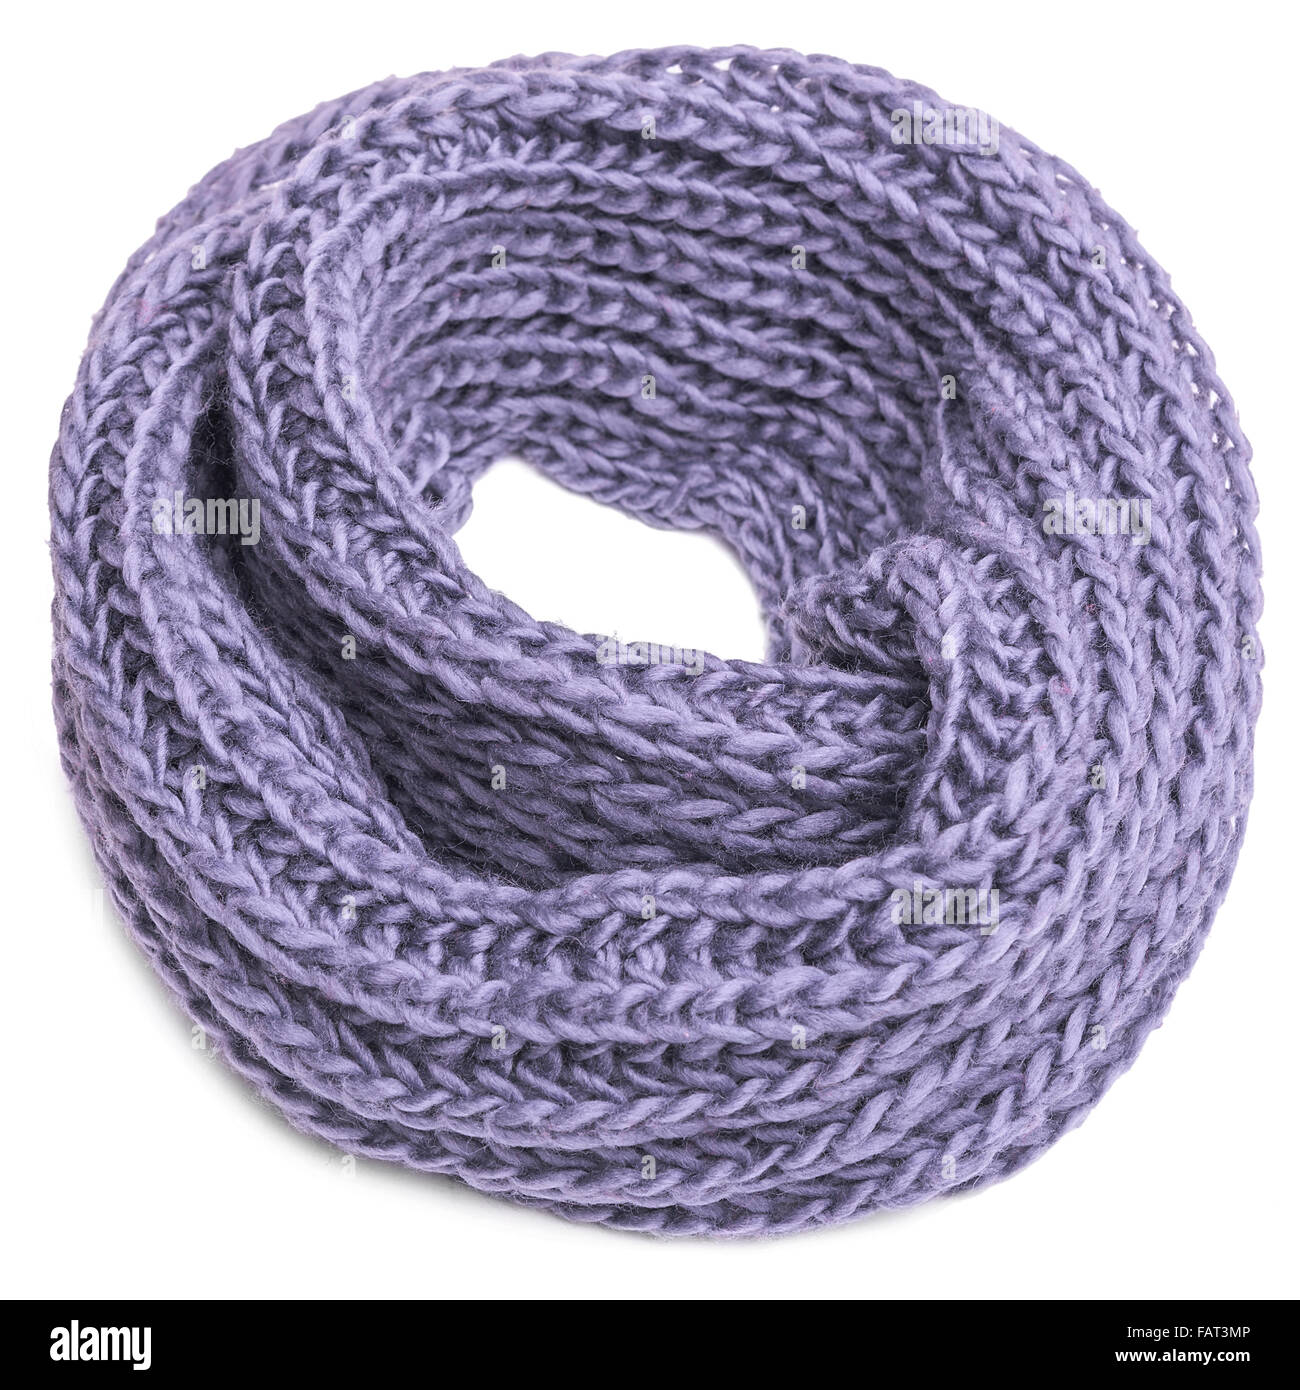 Knitted scarf on a white background Stock Photo